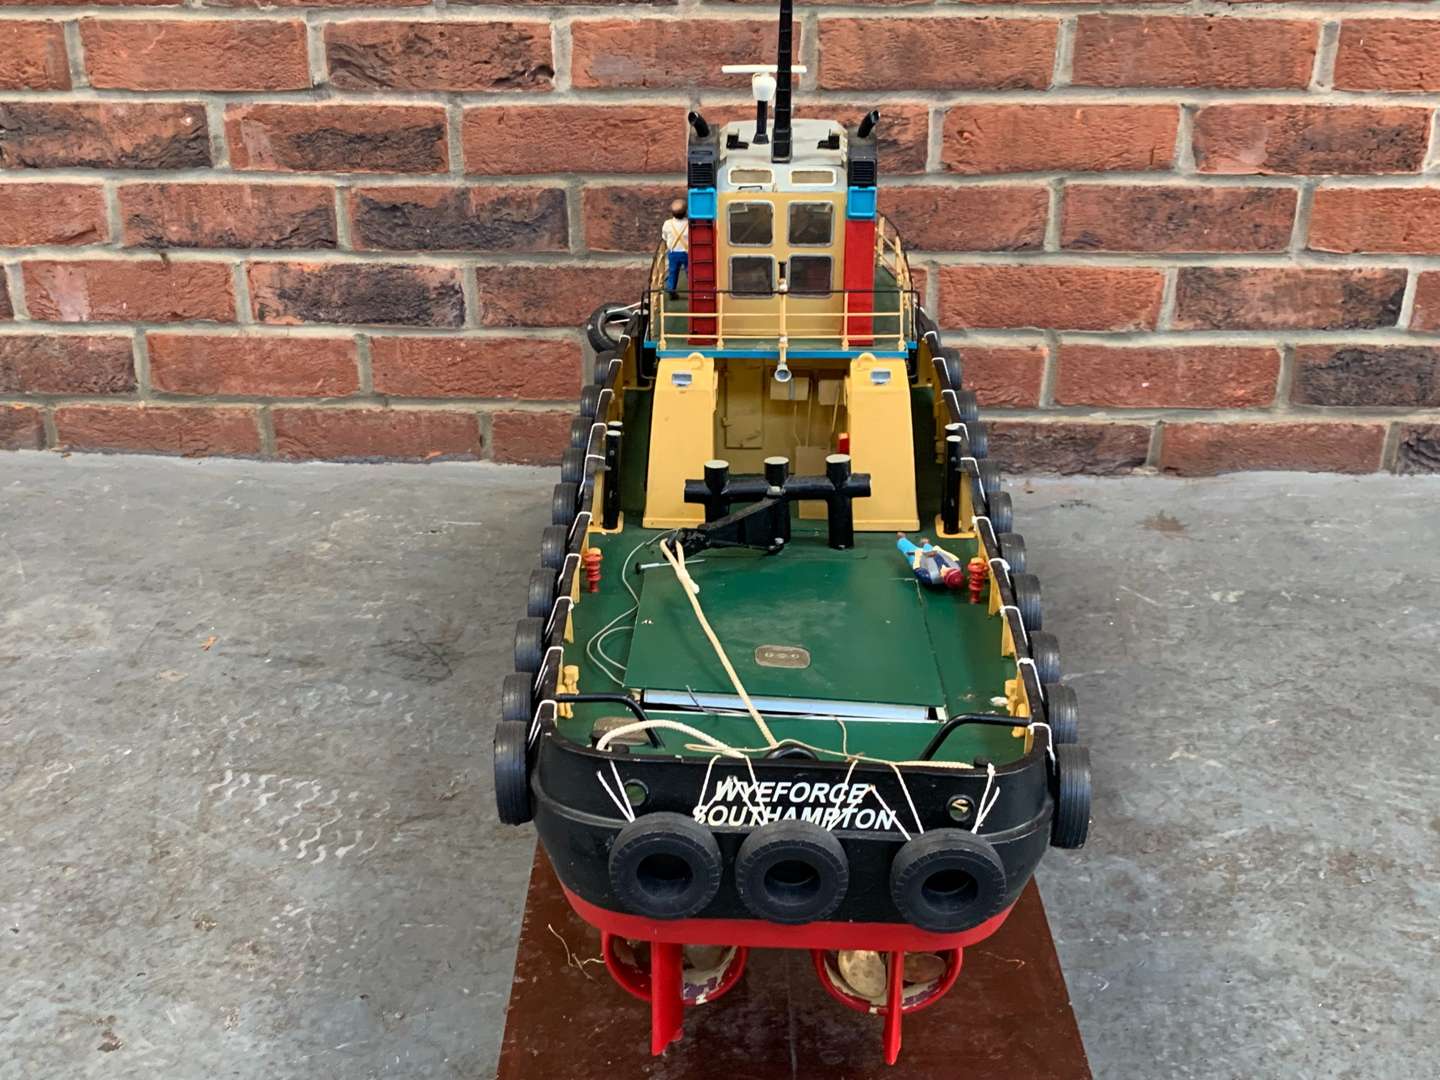 <p>Scratch Built Remote Controlled “Wyeforce” Tug Boat</p>